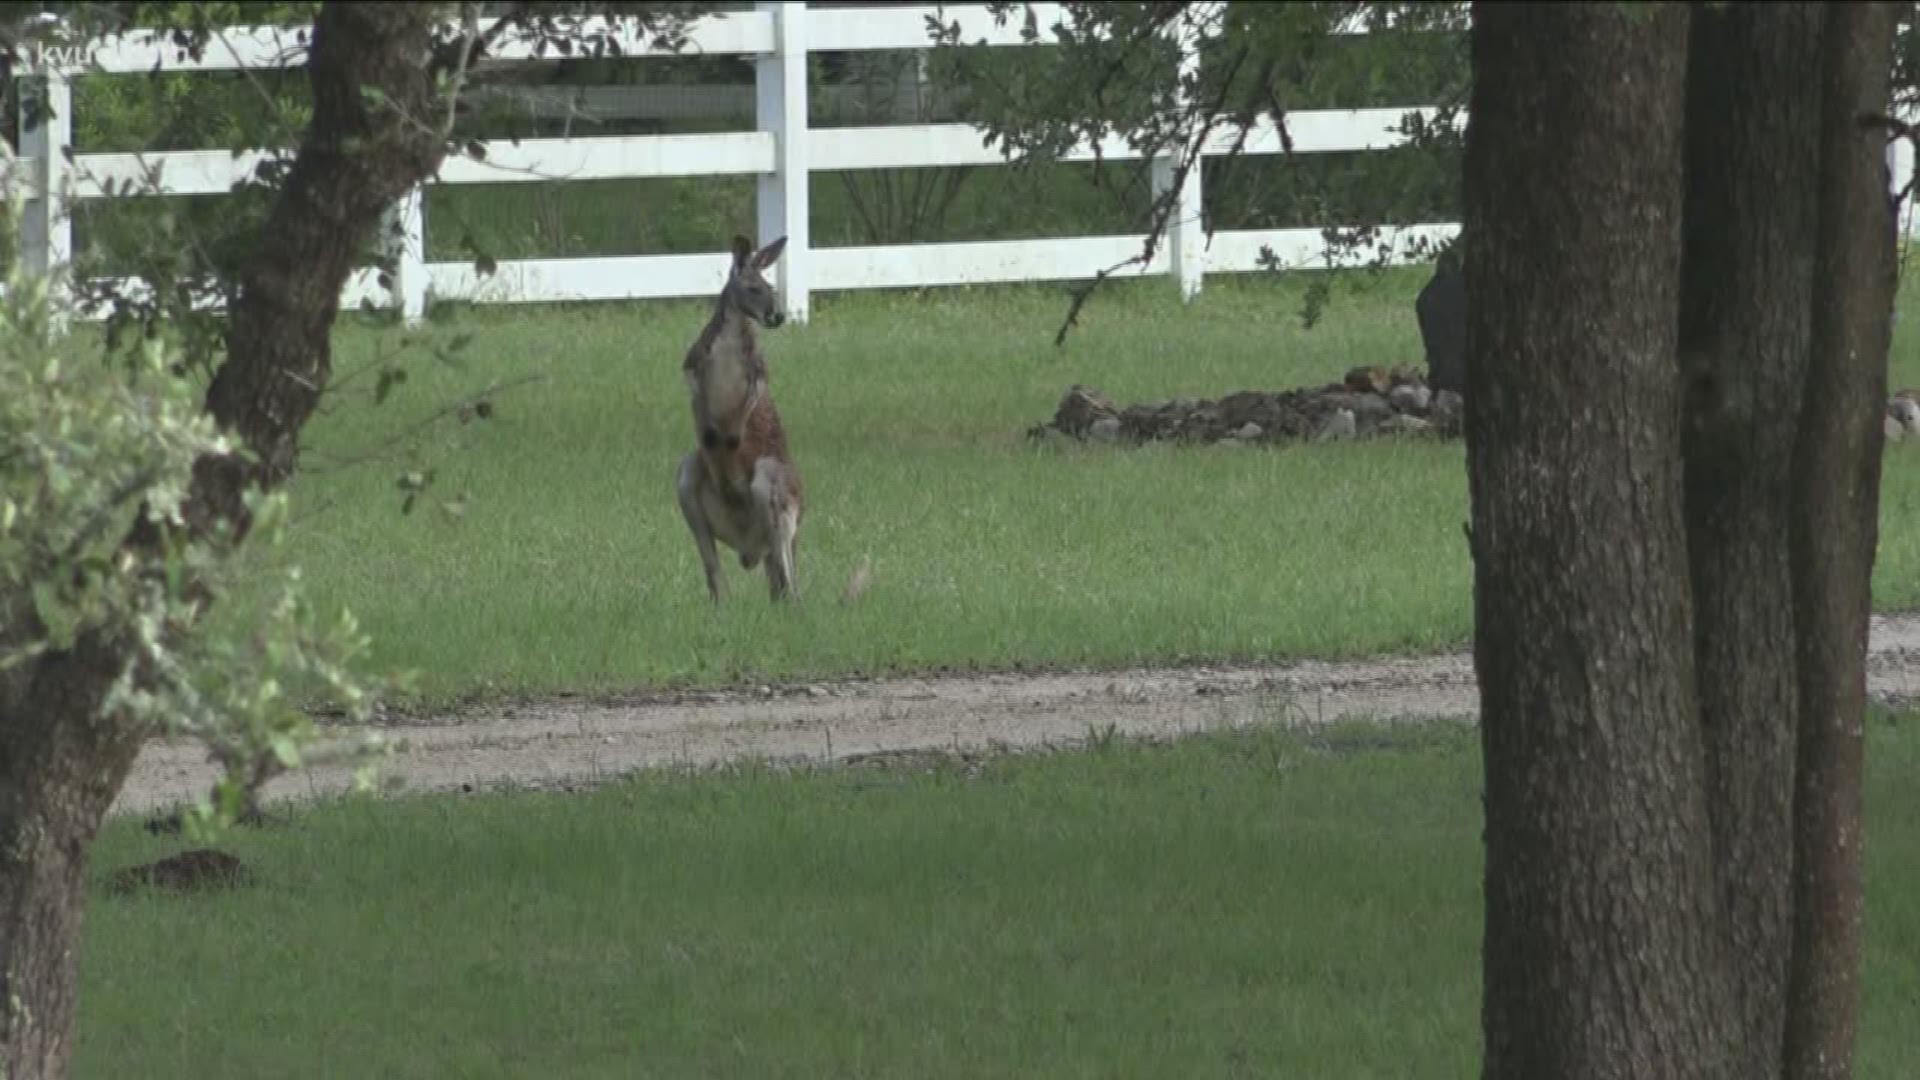 A kangaroo that escaped his enclosure in Wimberley is returning home Sunday after spending several days on the loose.